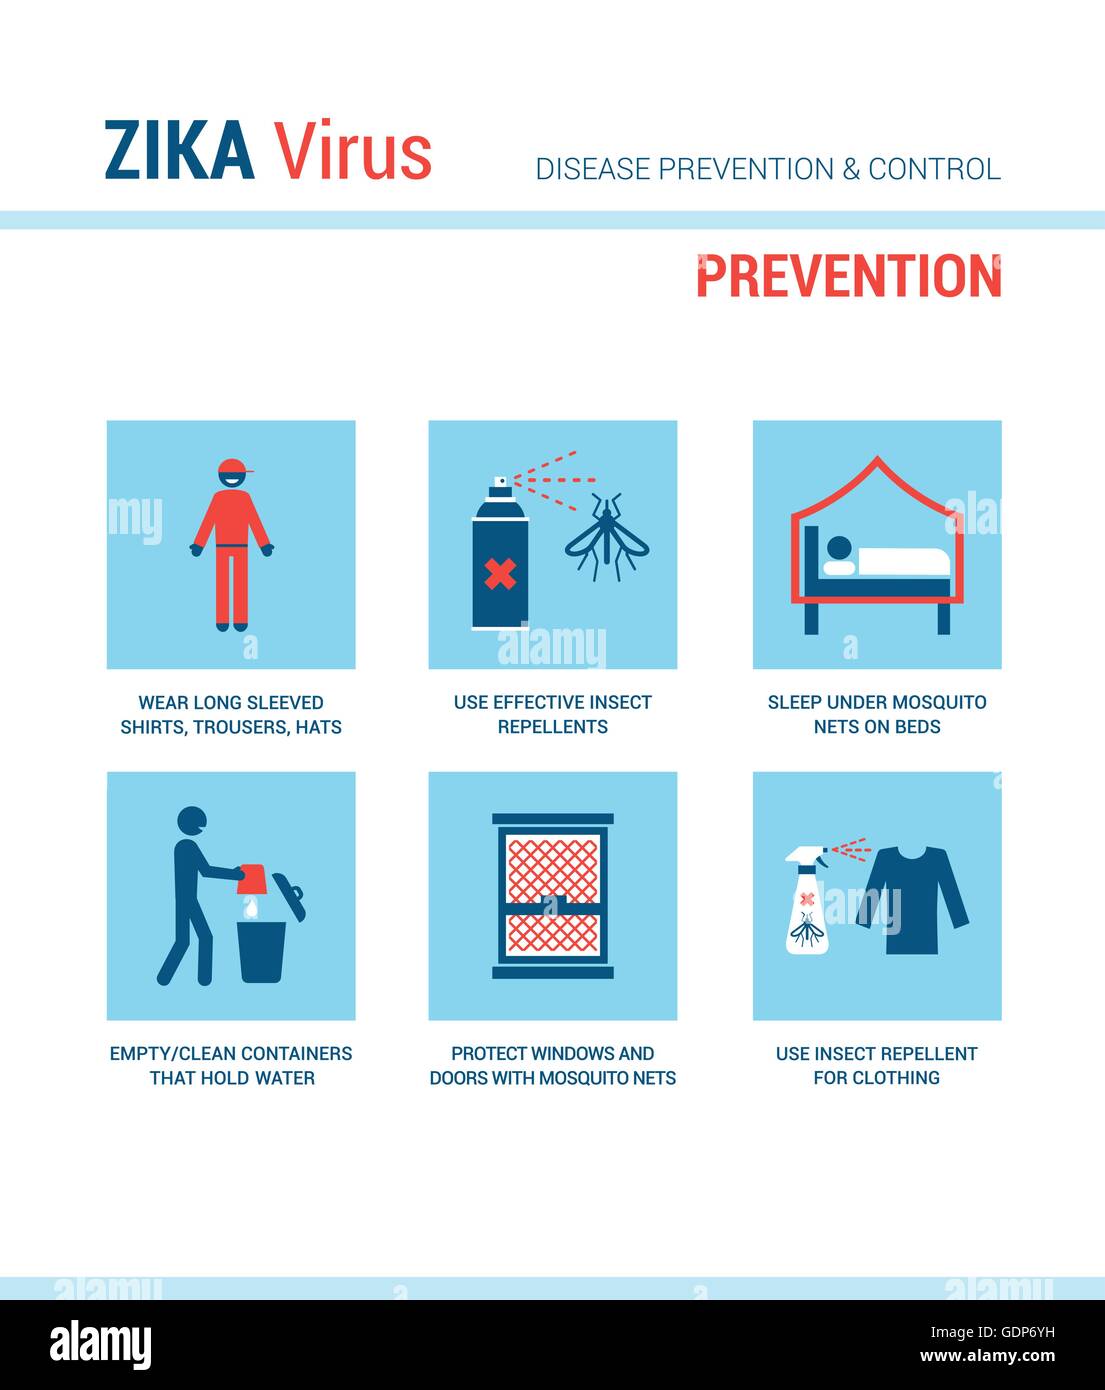 Zika virus prevention medical procedures with stick figures and text Stock Vector